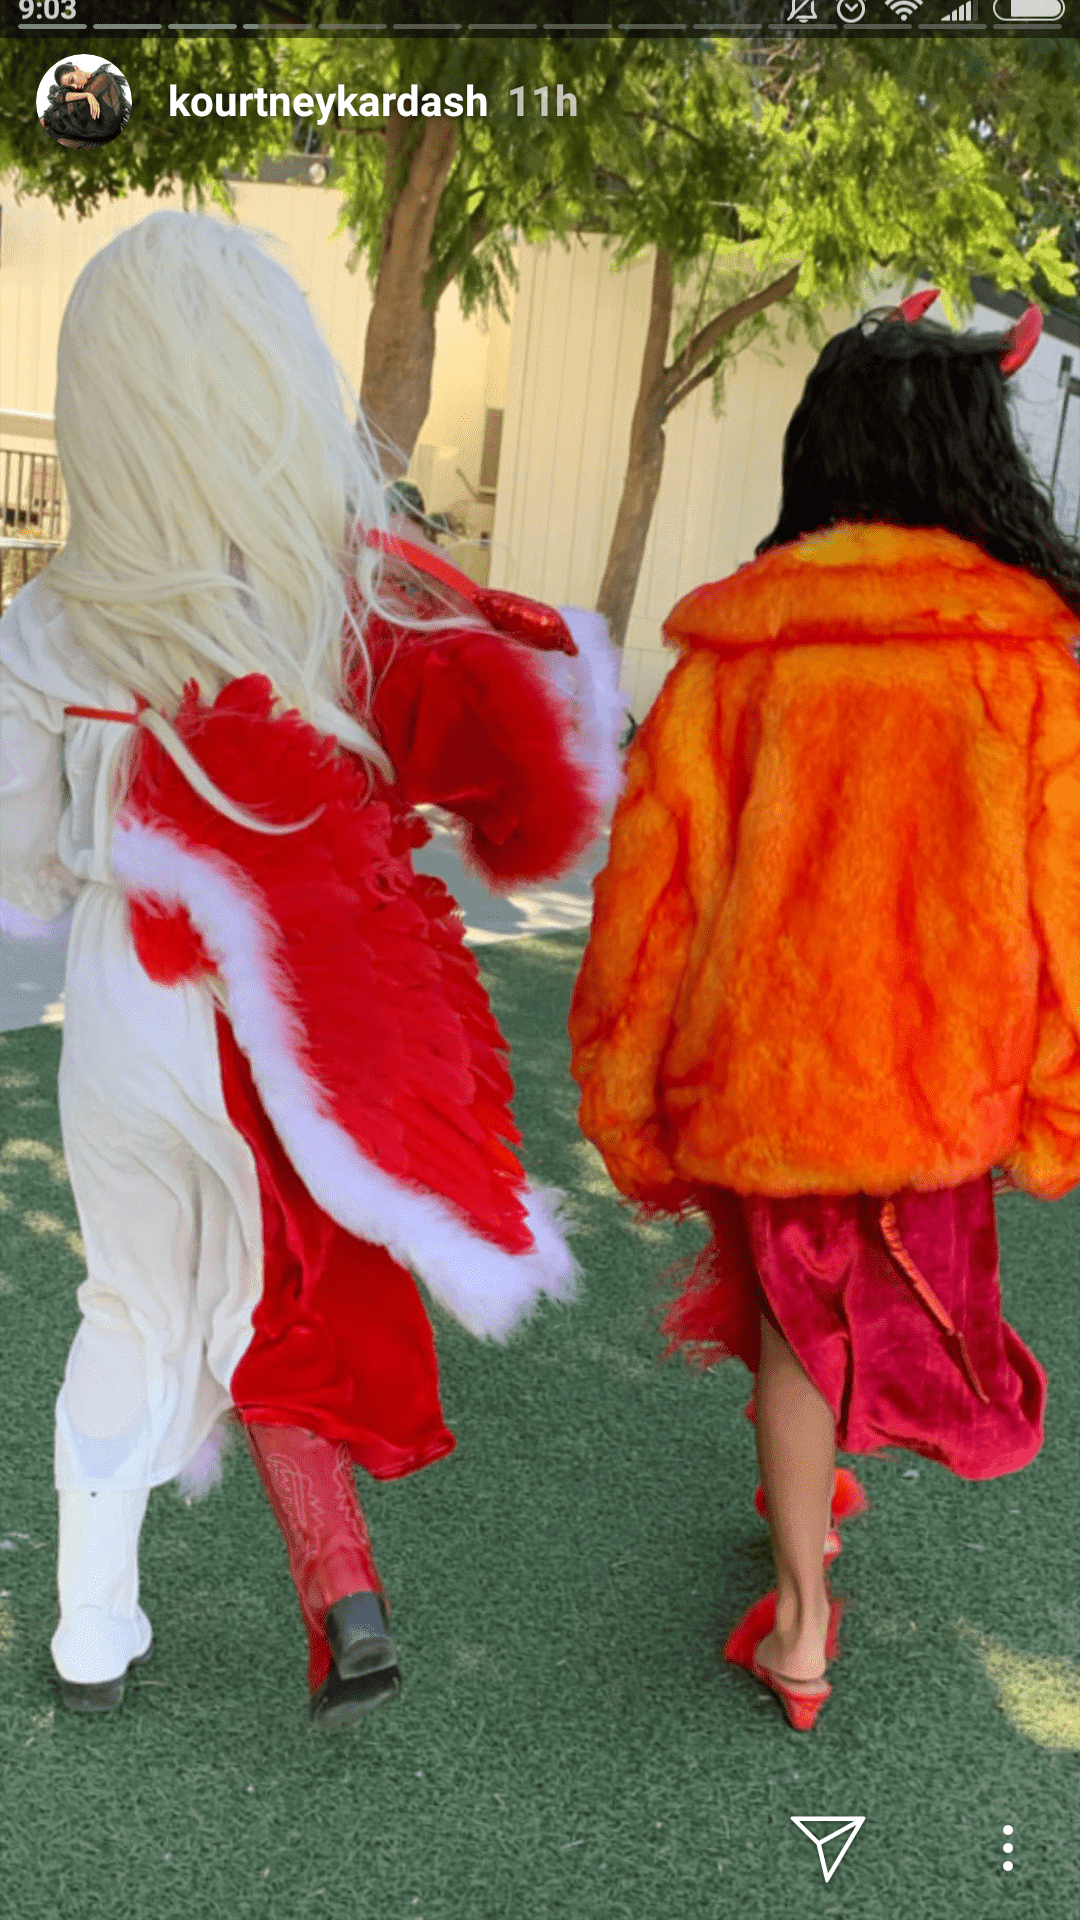 Penelope Disick goes and an angel/devil and North West dresses as a devil for Halloween | Source: instagram.com/kourtneykardash